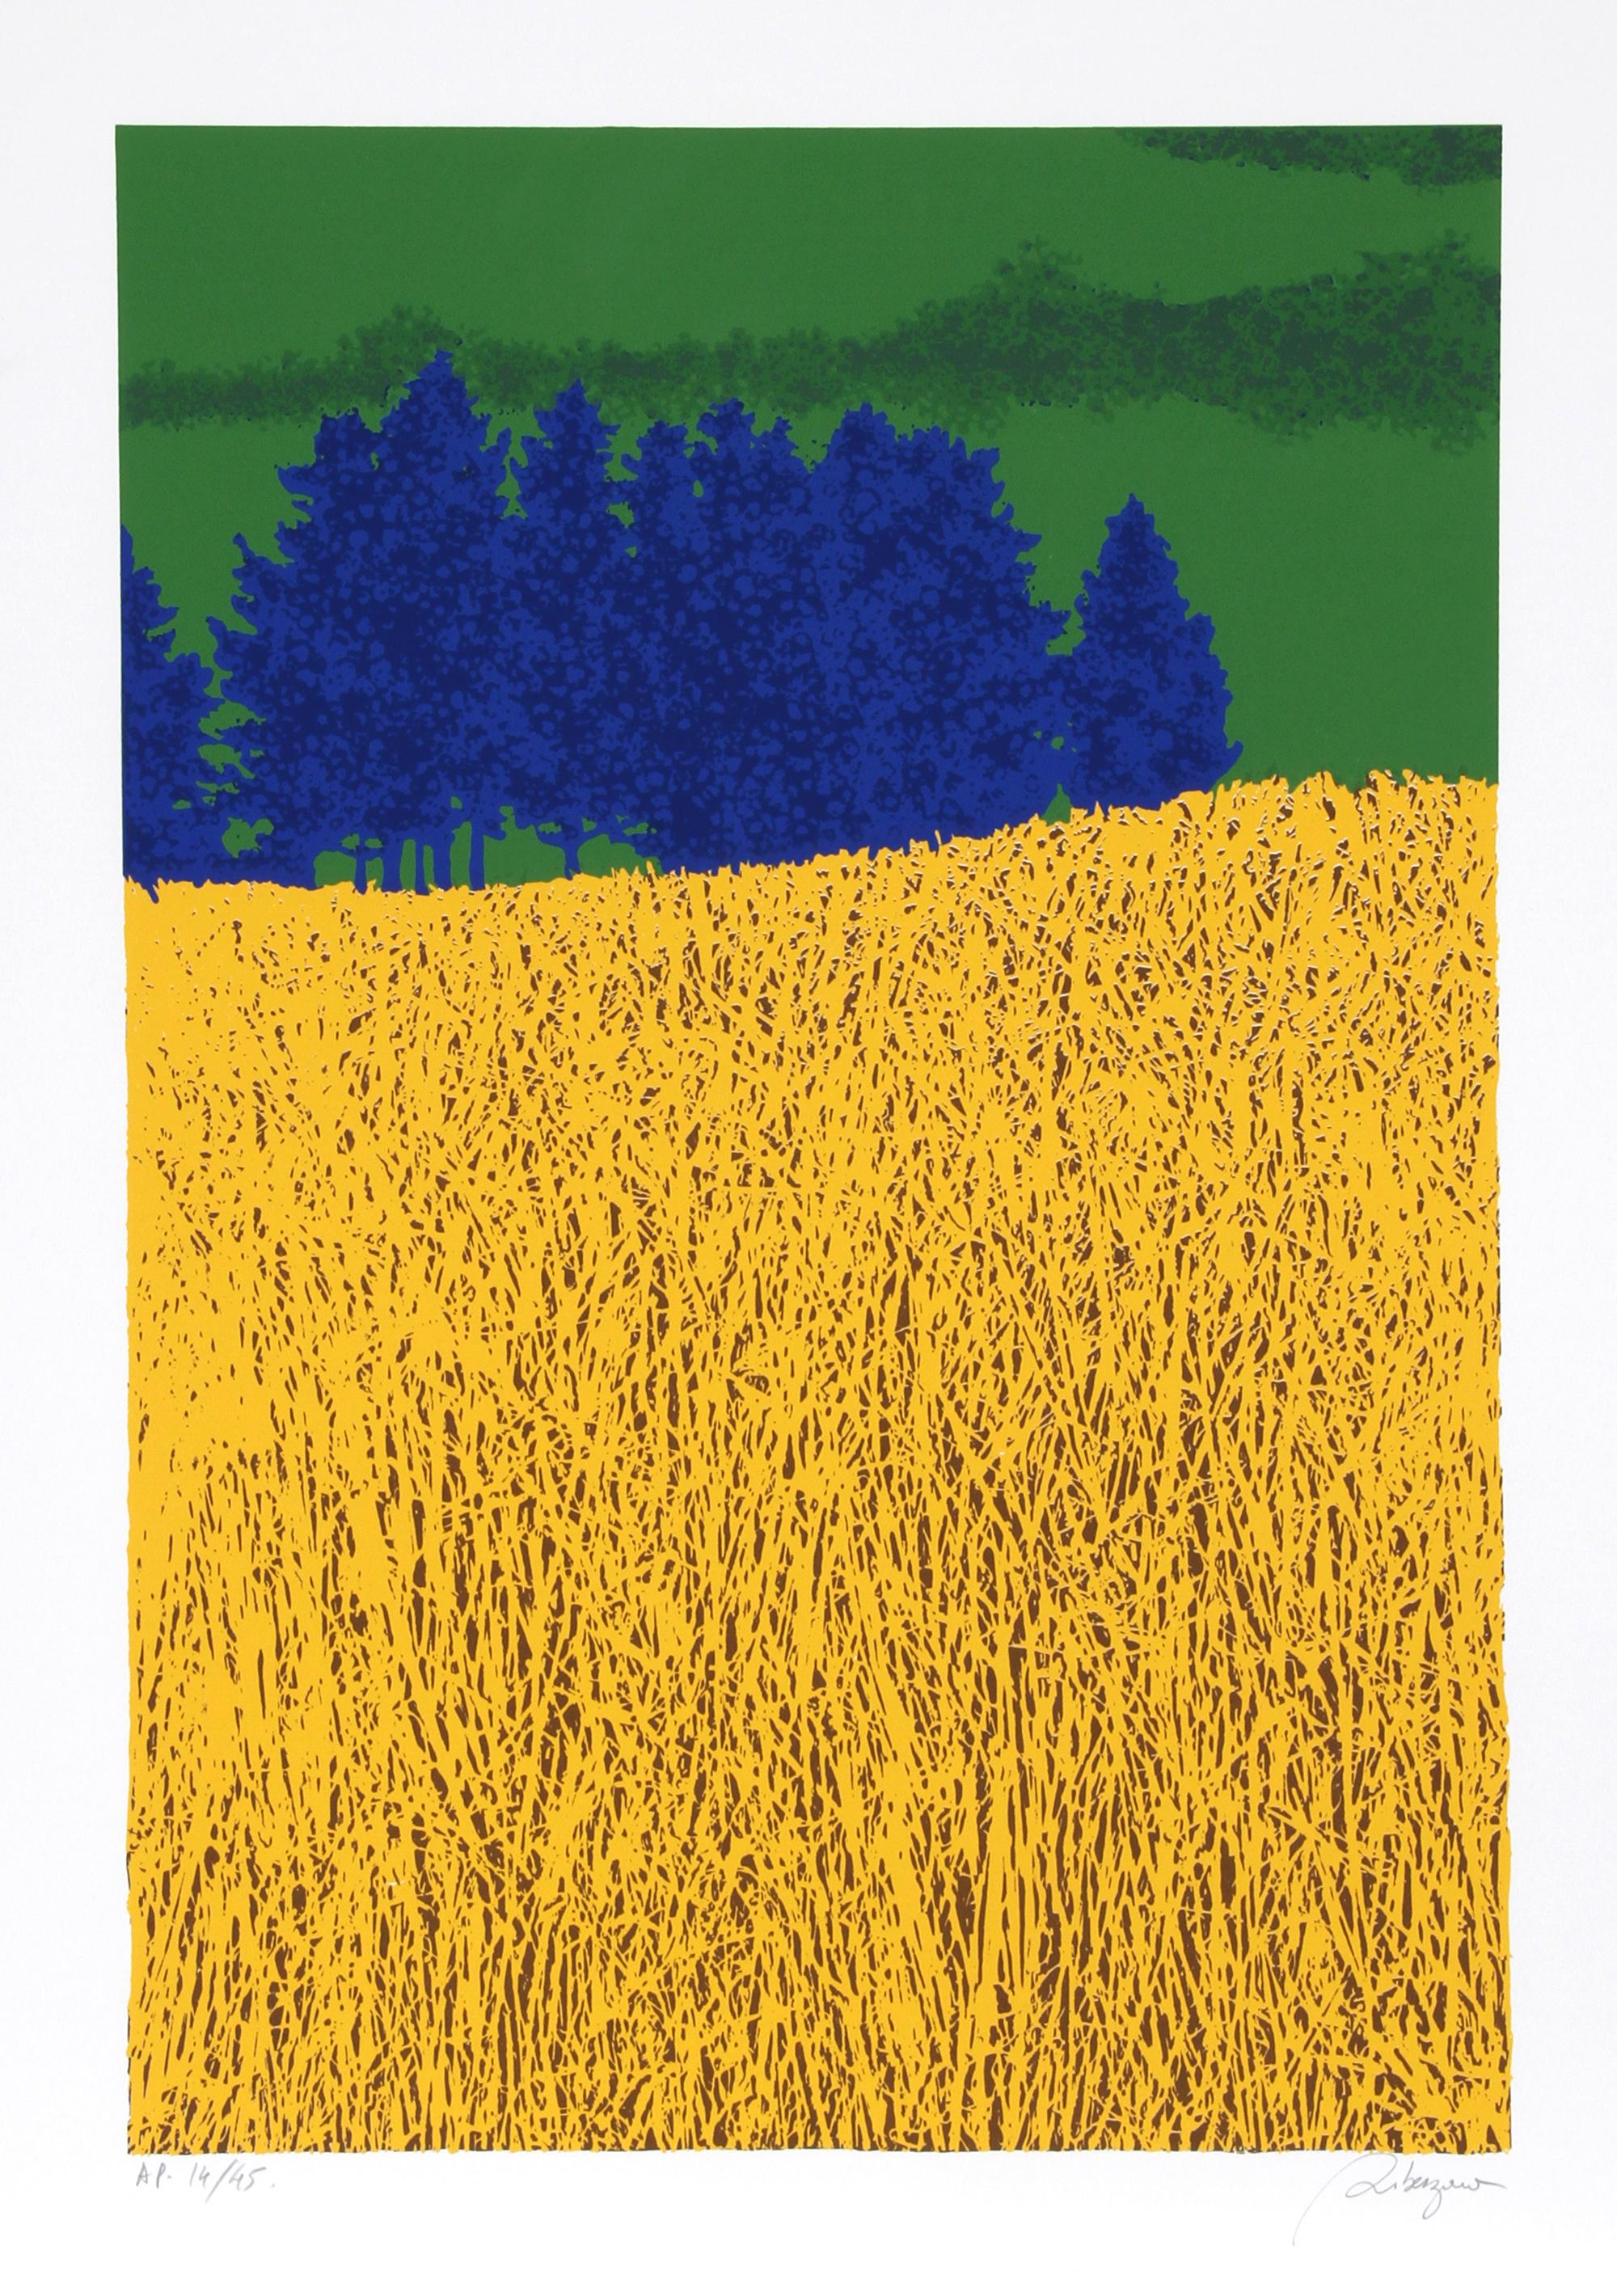 Champ de Blé & Sapins Bleus
Daniel Riberzani, French (1942)
Date: circa 1980
Screenprint on Arches, signed and numbered in pencil
Edition of 300, AP 45
Image Size: 28.5 x 19 inches
Size: 34.5 in. x 24.5 in. (87.63 cm x 62.23 cm)